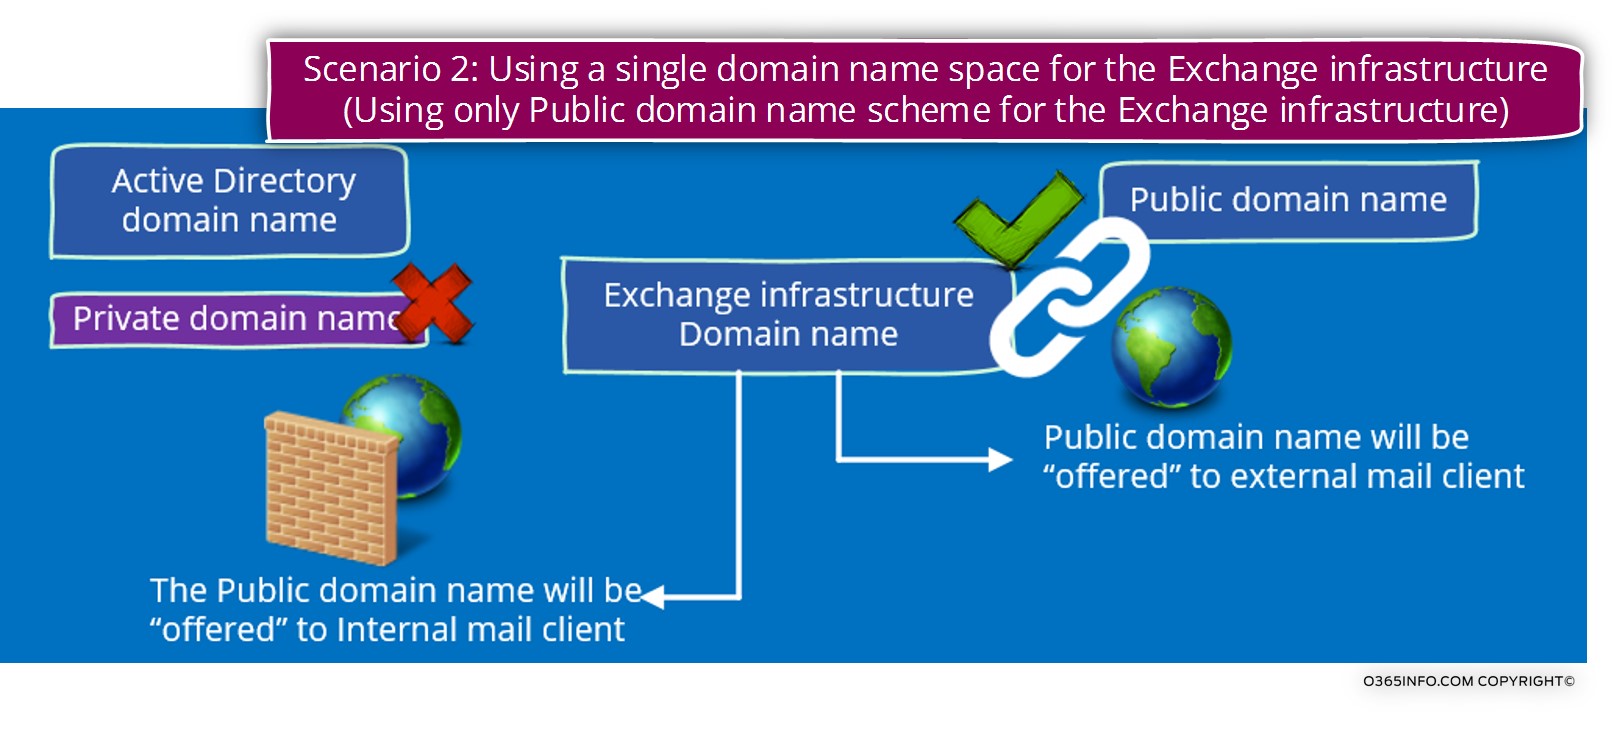 Scenario 2- Using a single domain name space for the Exchange infrastructure -01